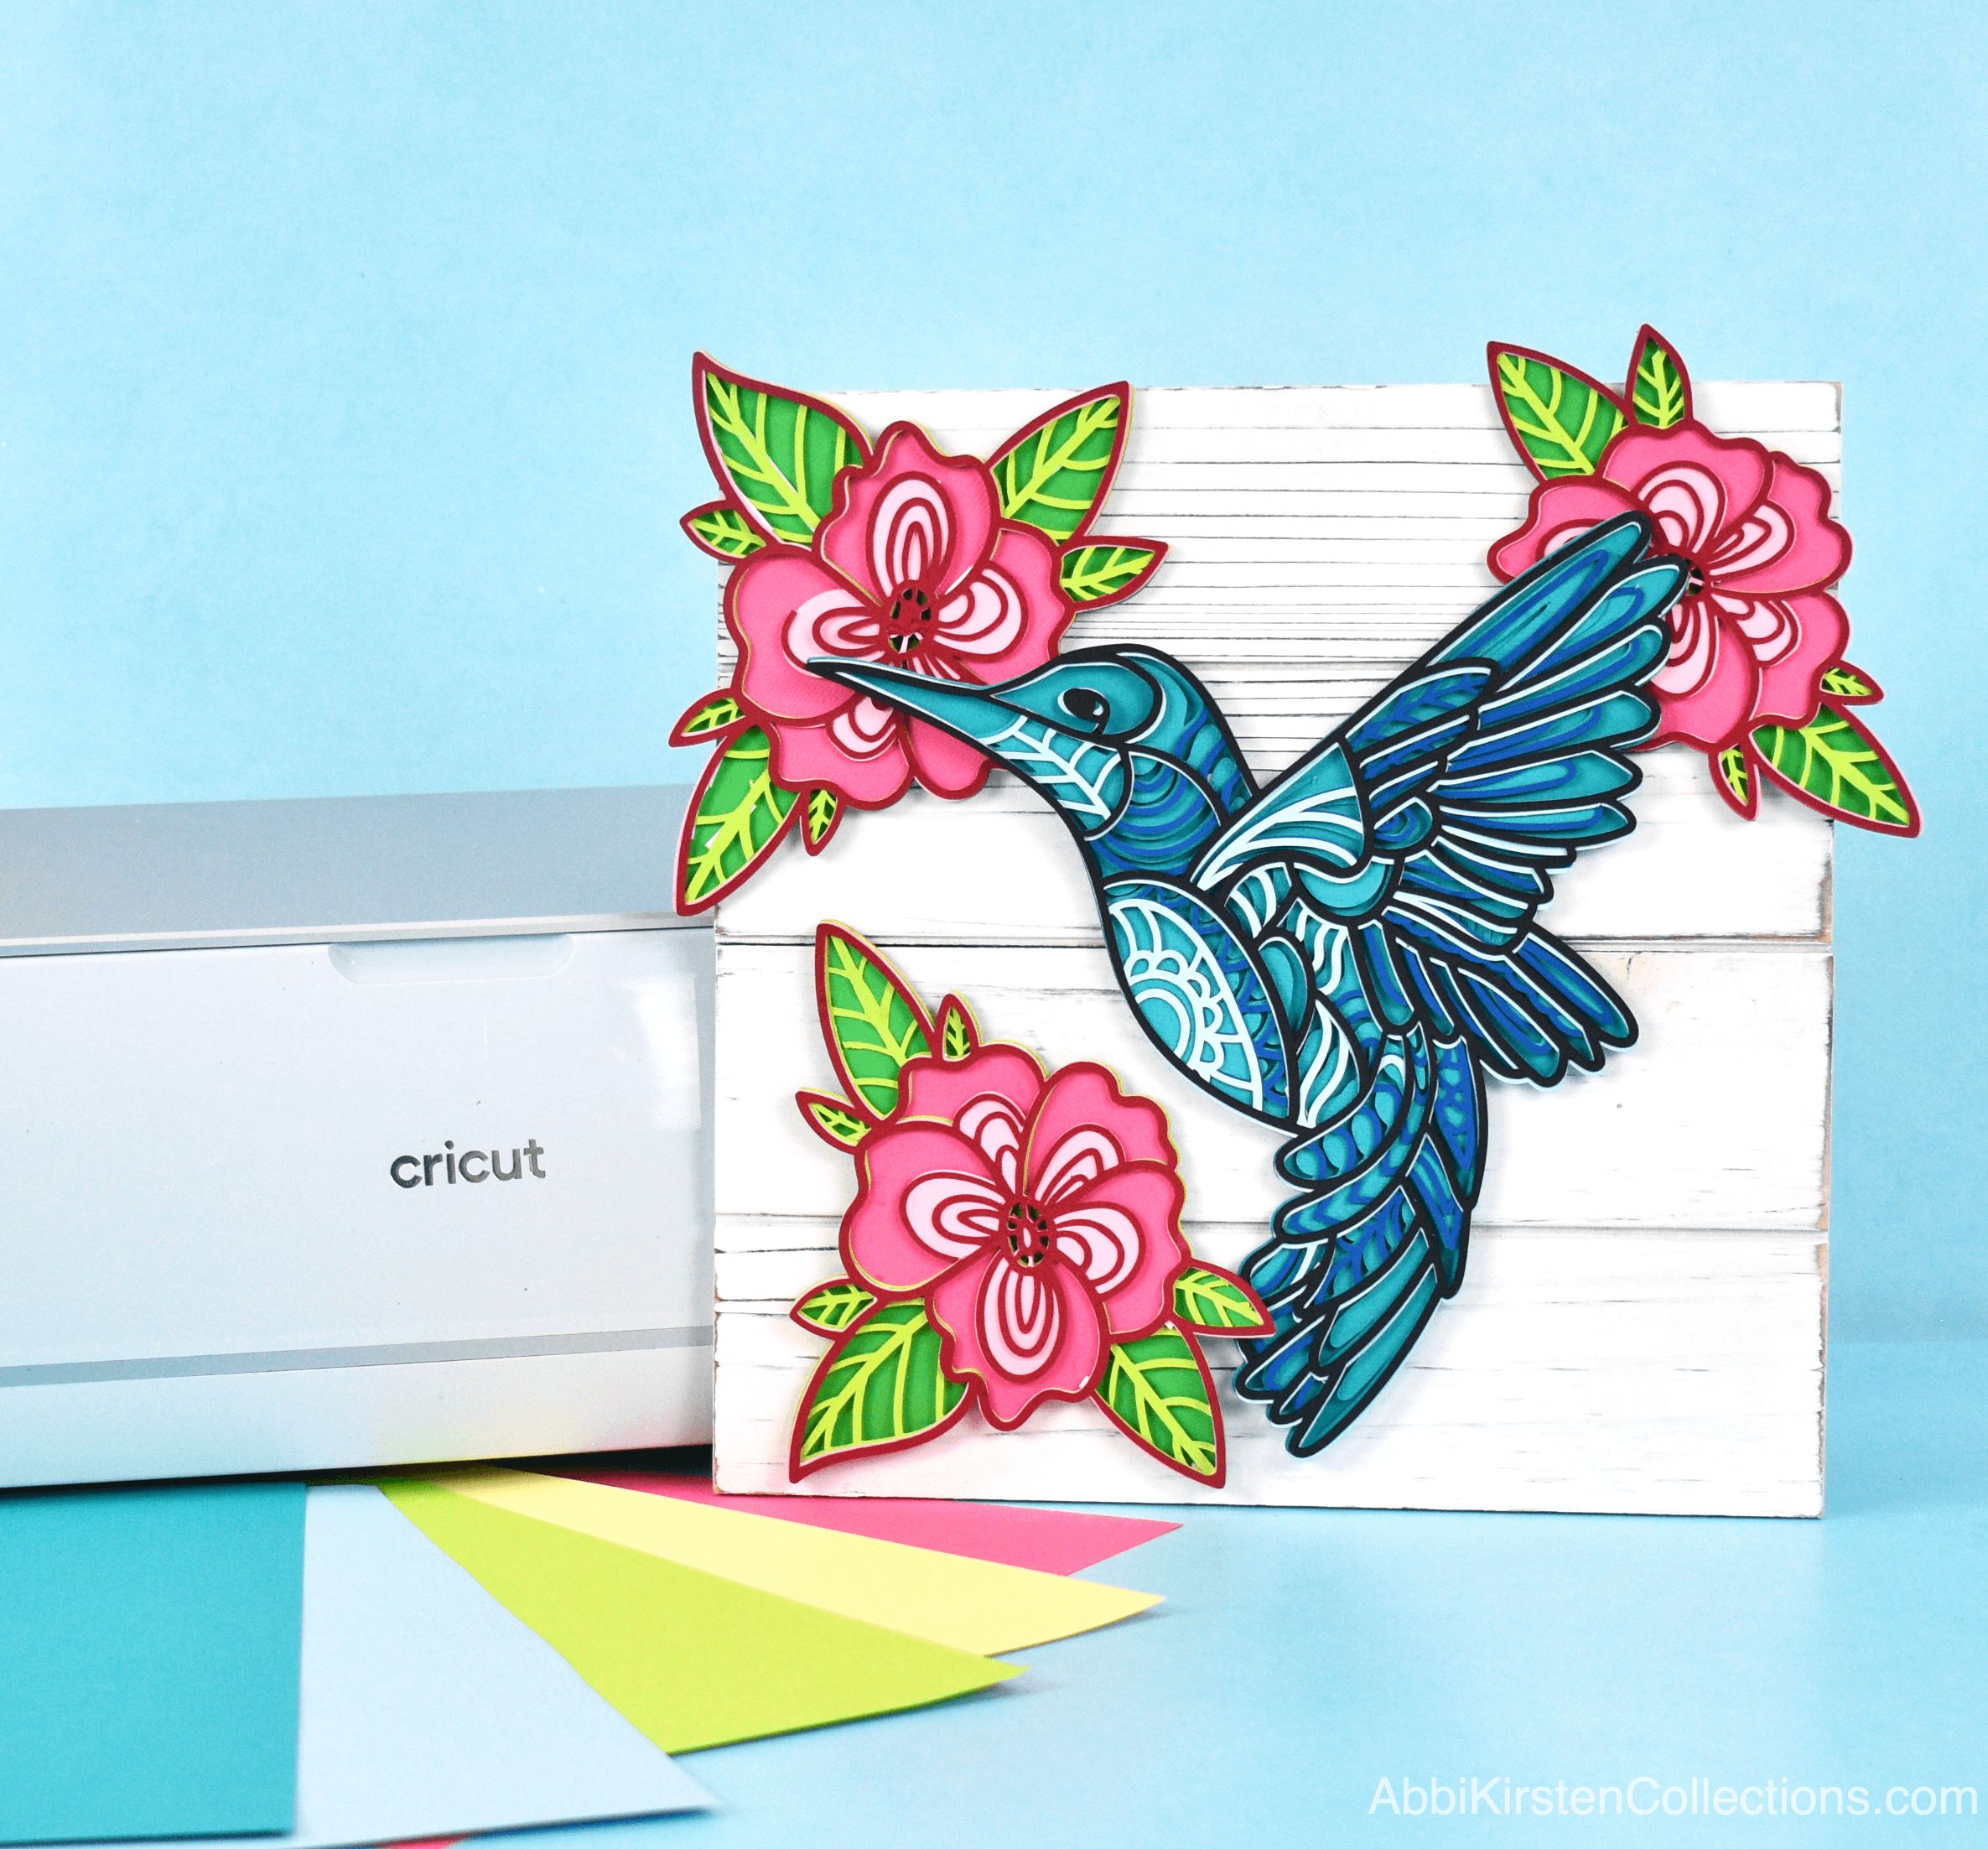 How To Cut Cardstock On Cricut Story - Abbi Kirsten Collections